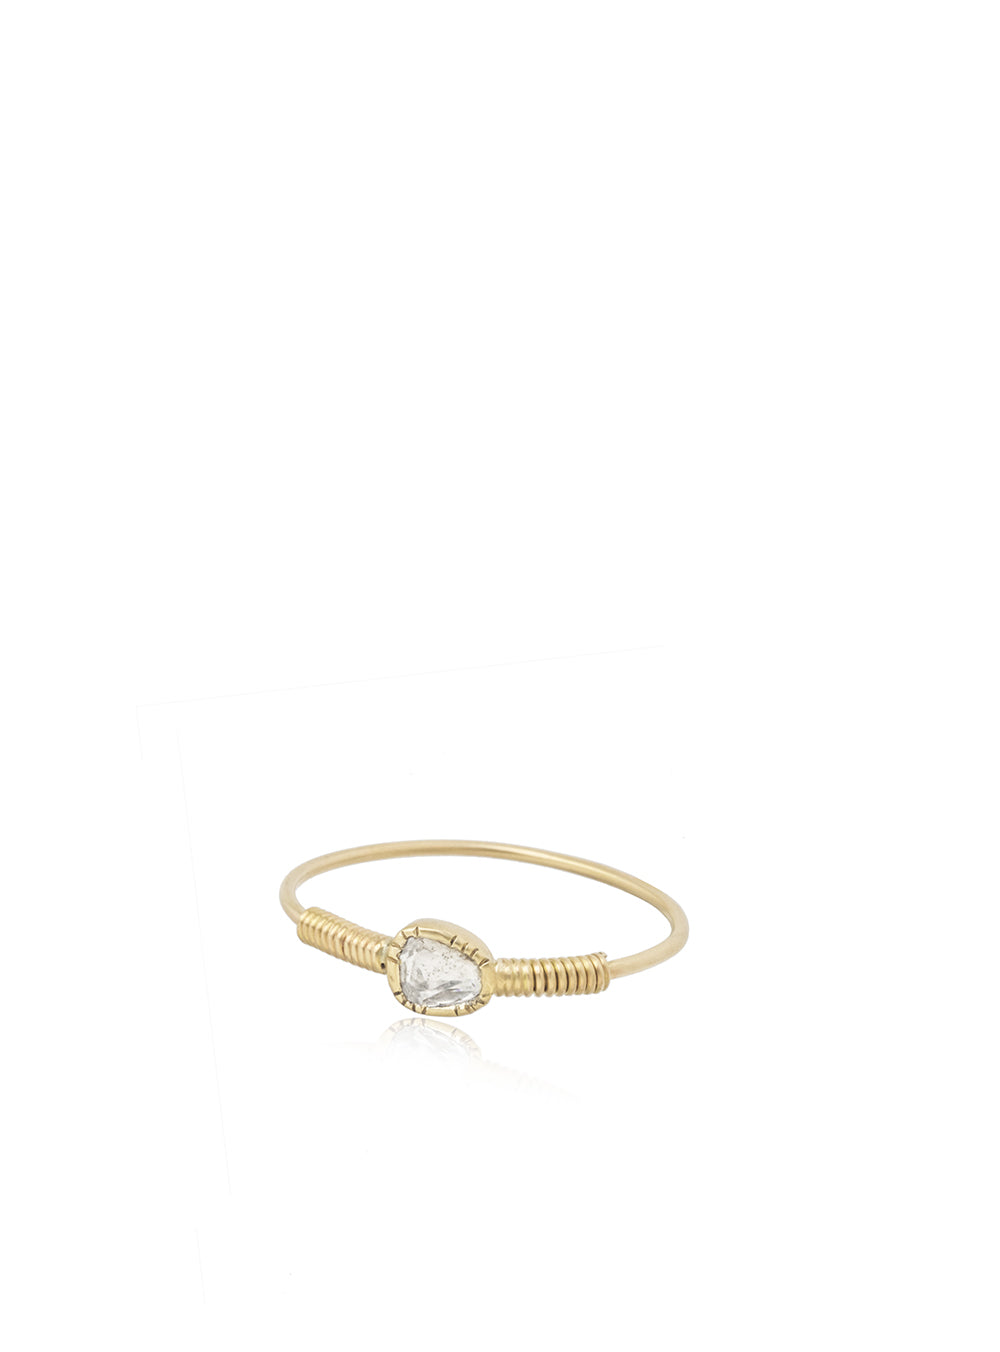 GOLD THREAD AND DIAMOND RING